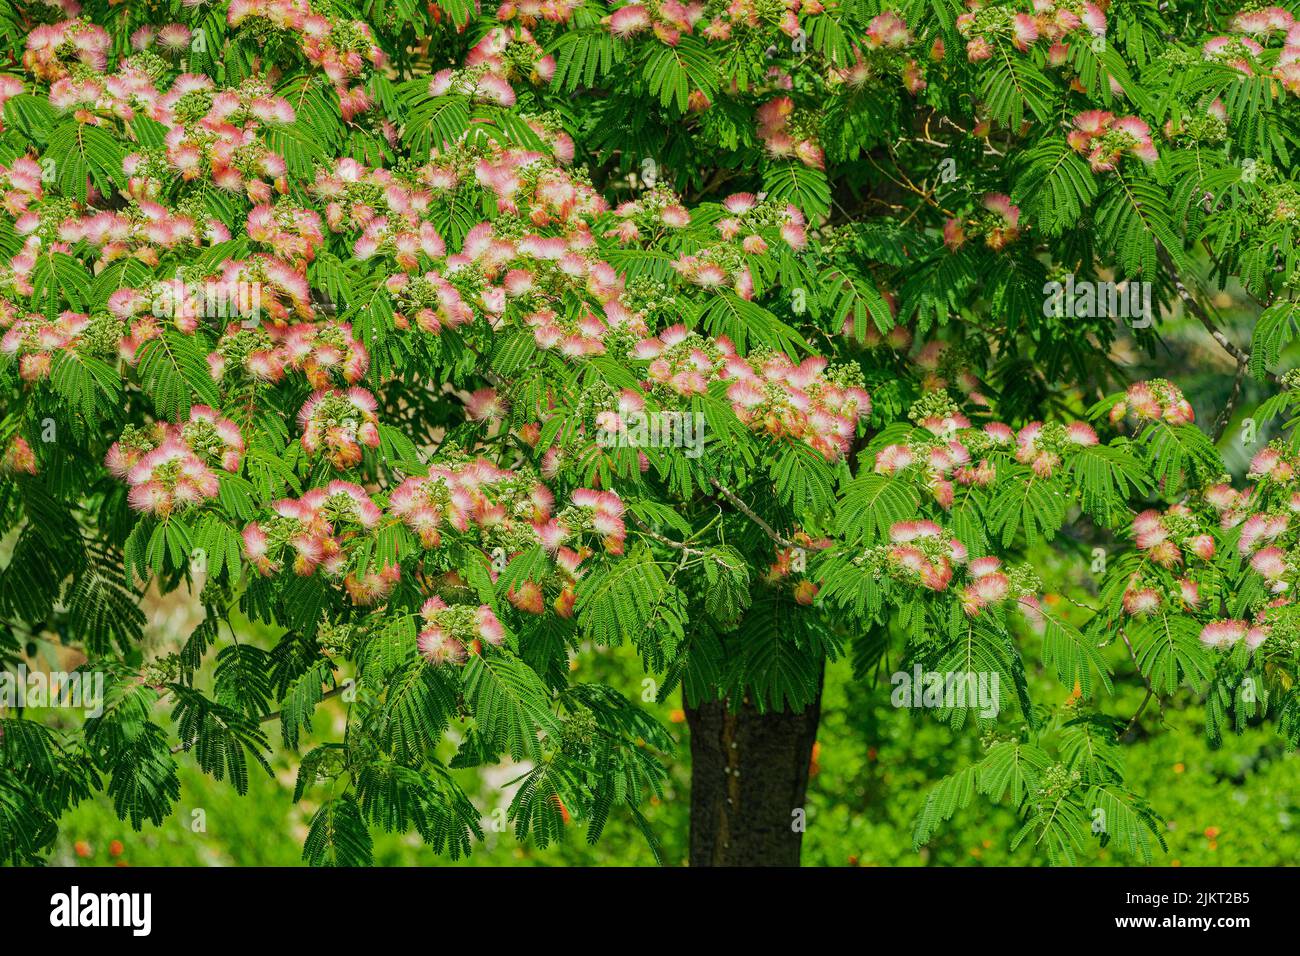 Persian silk tree is widely used in parks as ornamental tree, but it is considered as invasive species in USA. Stock Photo